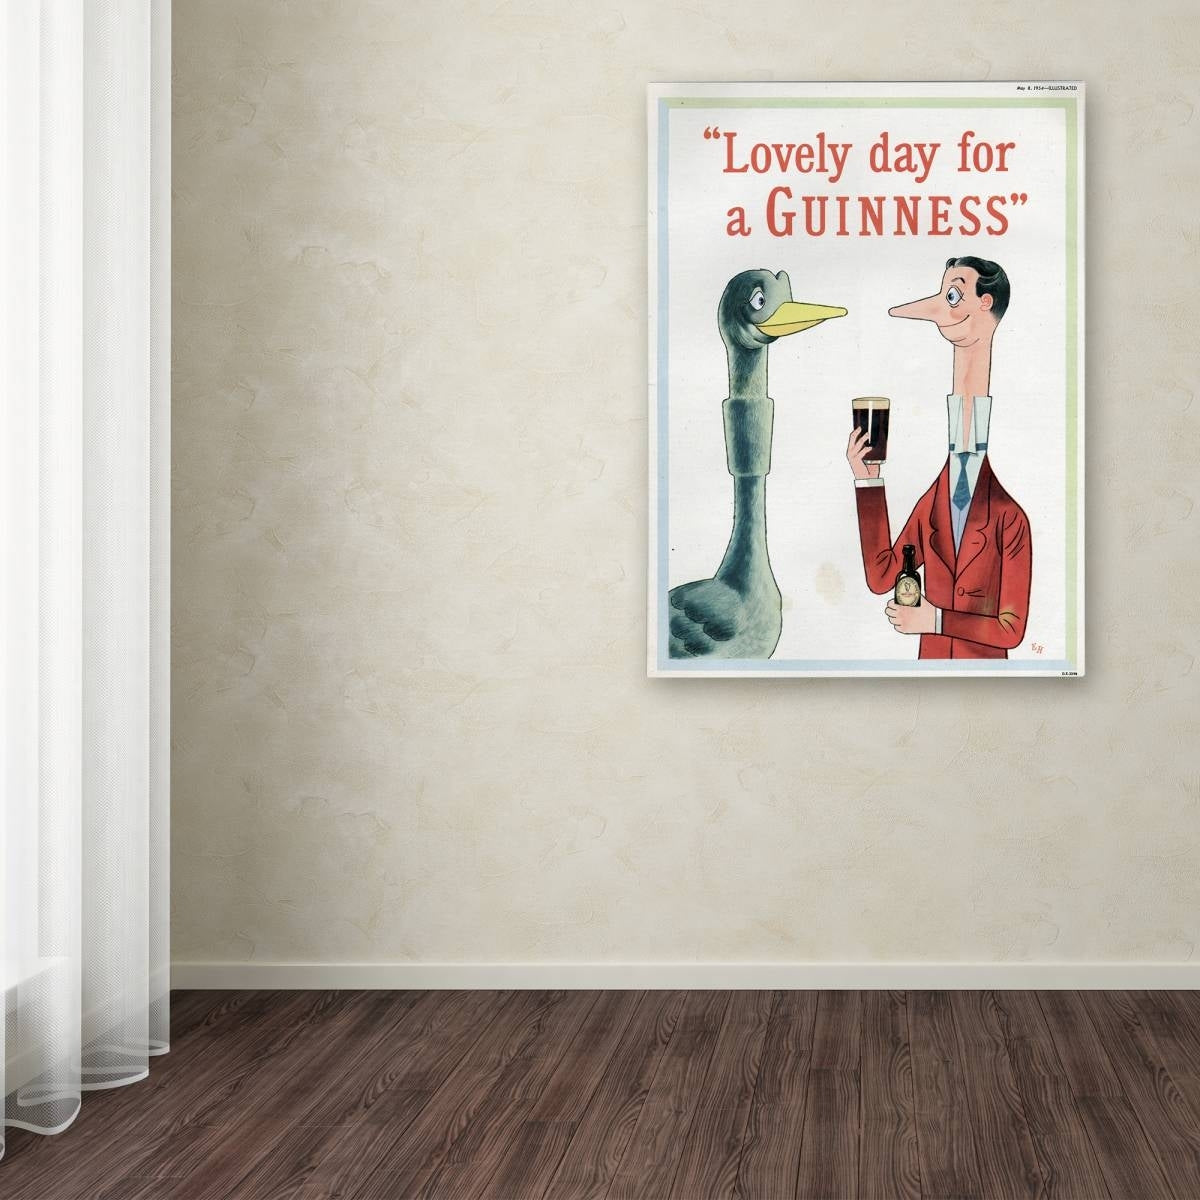 A Guinness Brewery 'Lovely Day For A Guinness XIII' Canvas Art poster on the wall.